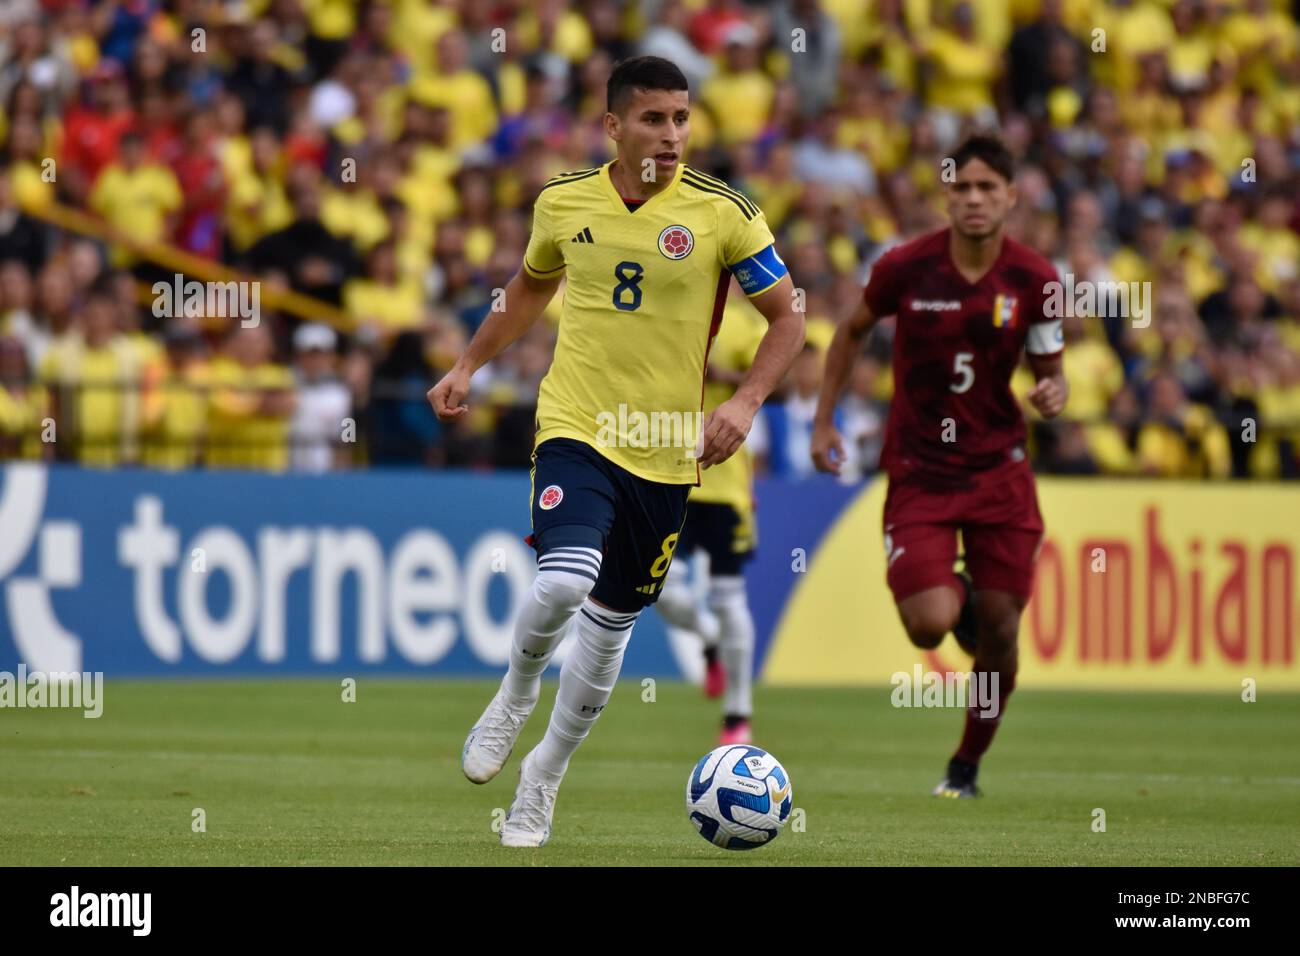 Bogota, Colombia on February 12, 2023. Colombia's Gustavo Puerta during the South American U-20 Conmebol Tournament match between Colombia and Venezuela, in Bogota, Colombia on February 12, 2023. Photo by: Cristian Bayona/Long Visual Press Stock Photo